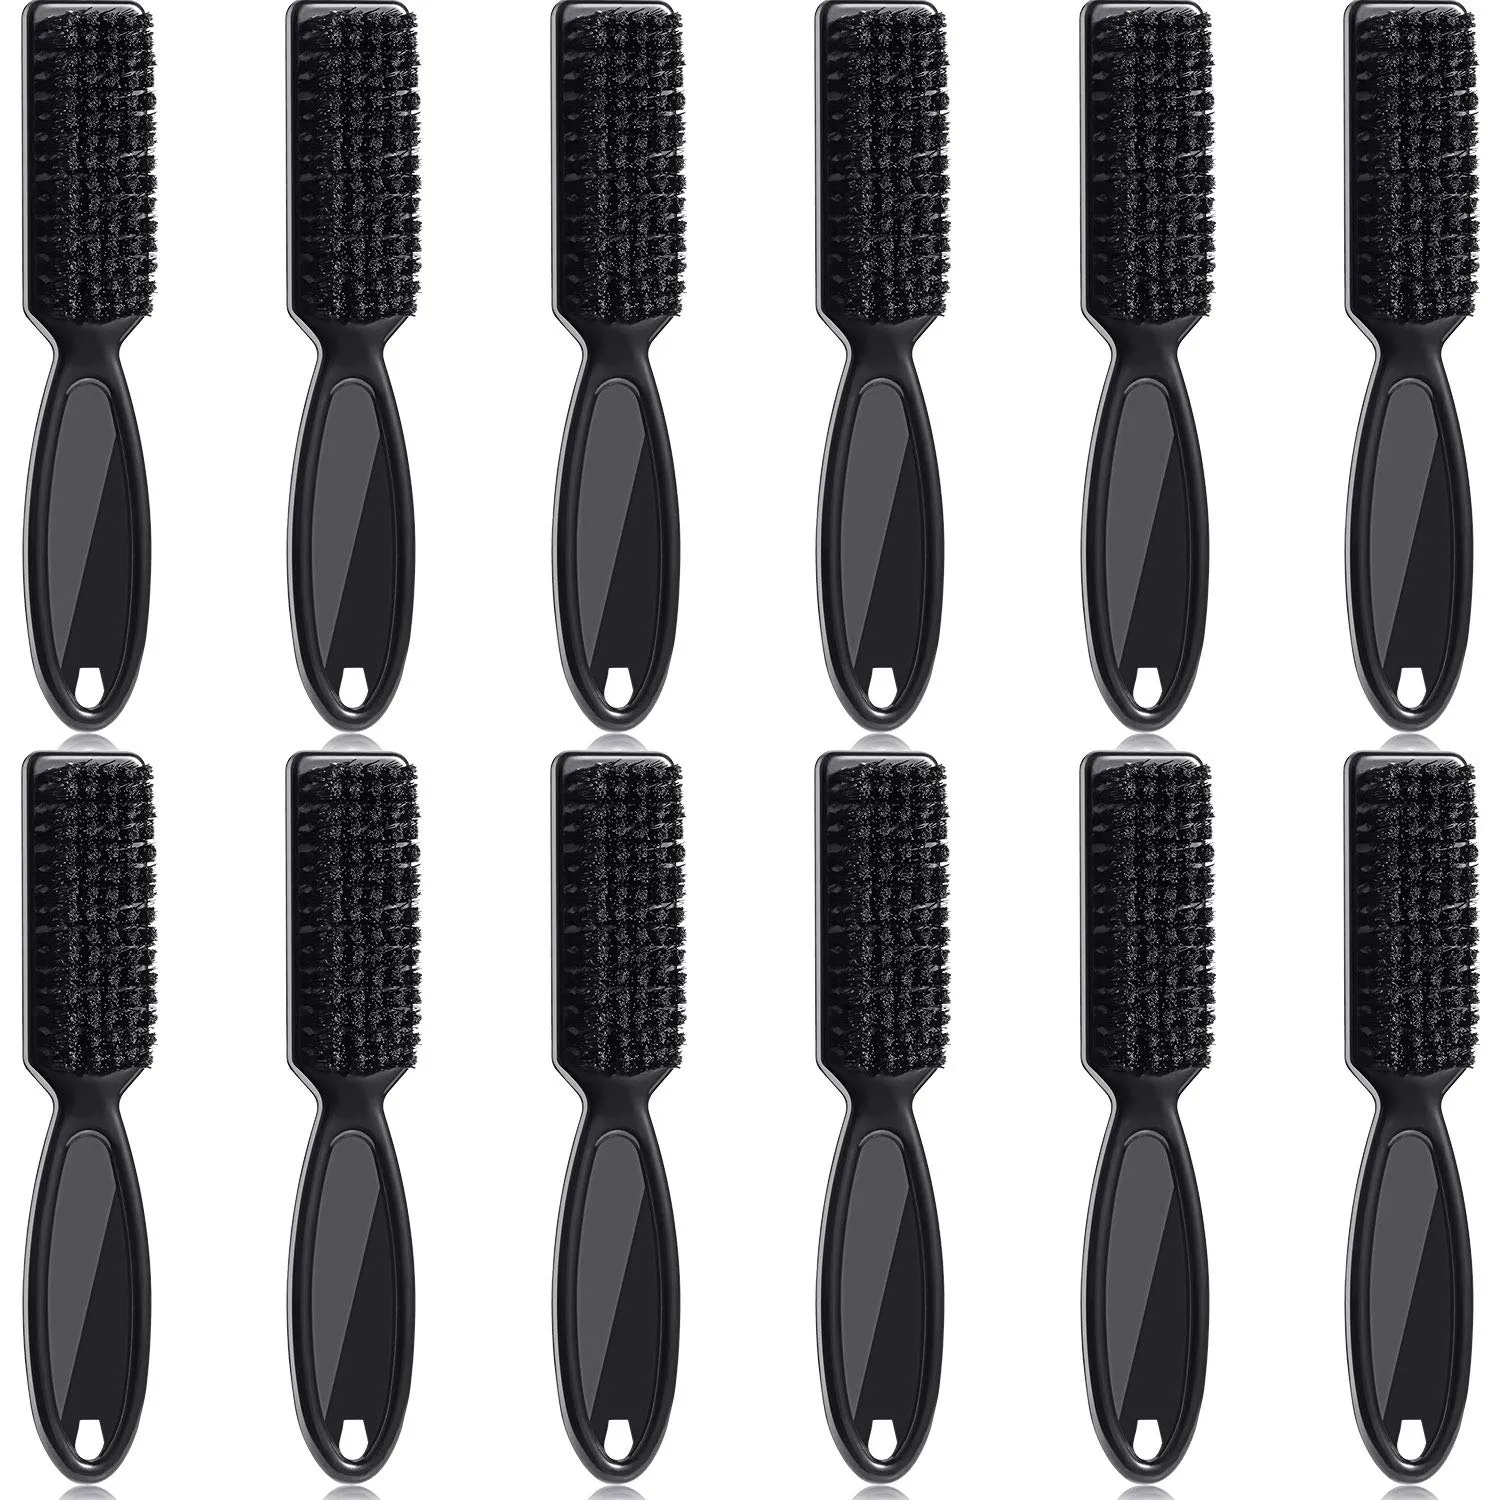 wide tooth comb detangling hair brush care handgrip heat resistant styling combs for curly dry wet long thick hair black